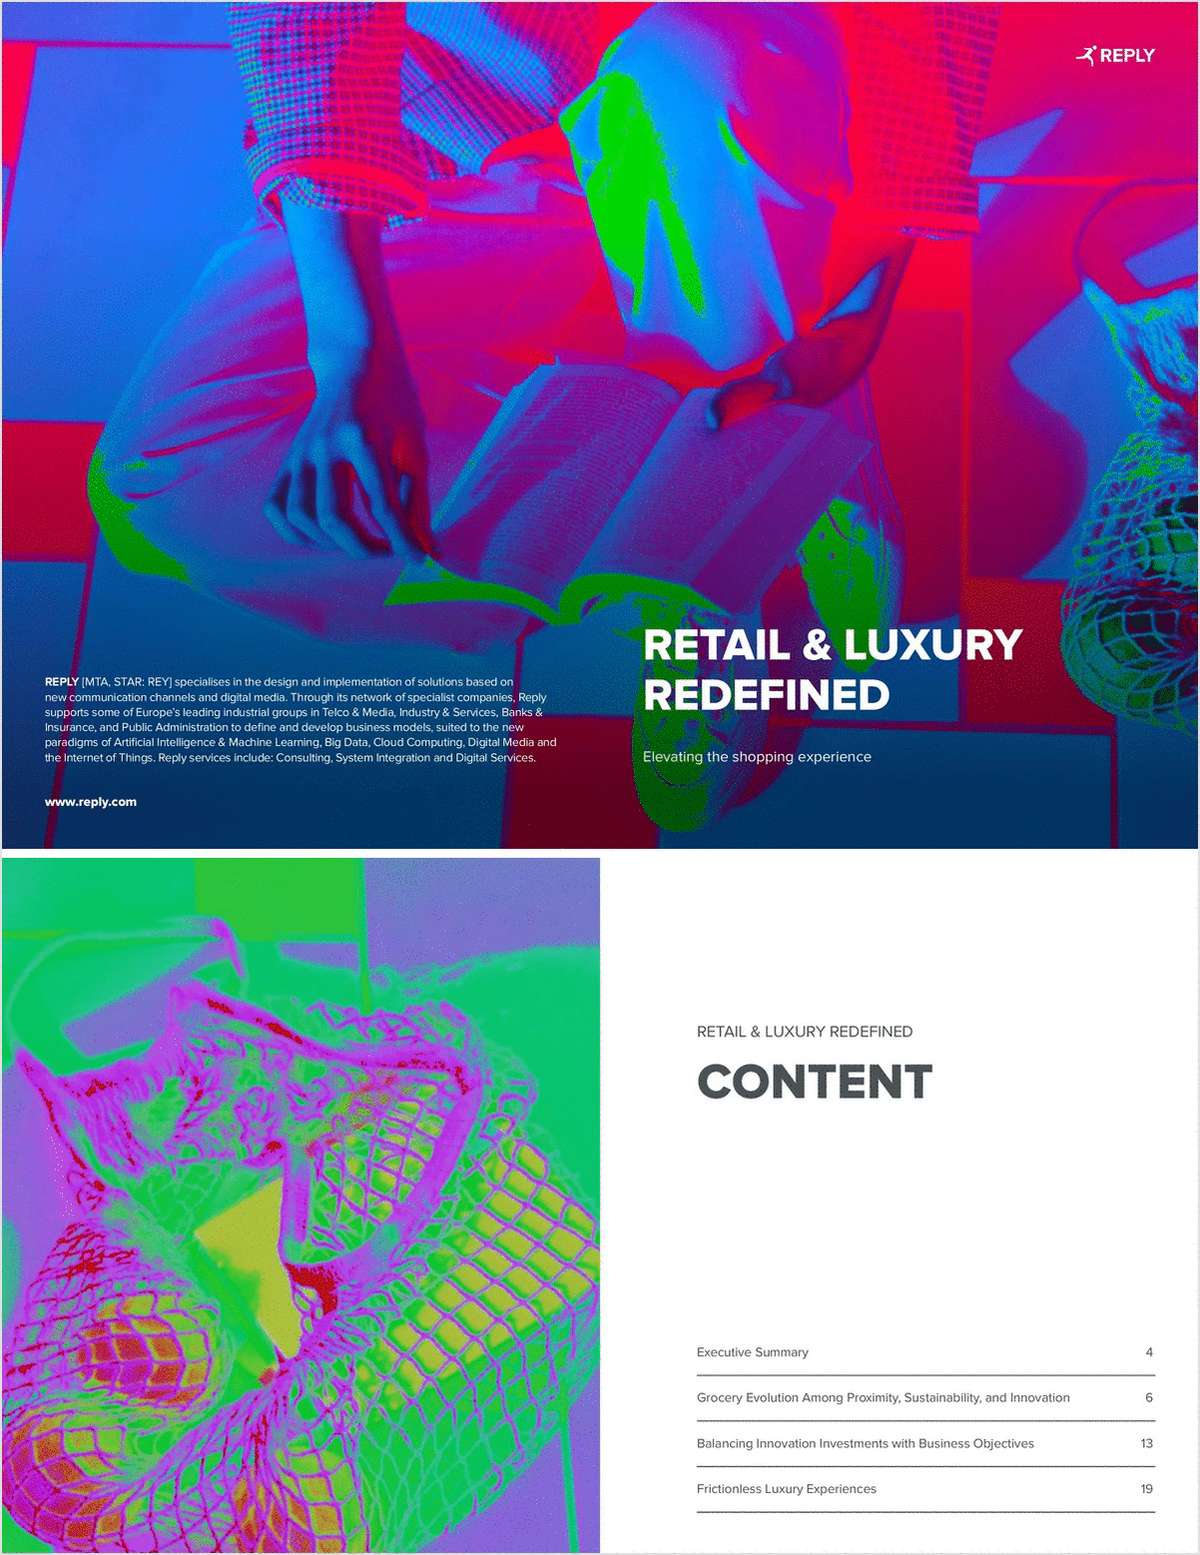 Next frontier for luxury retail blurs lines between physical and digital channels.